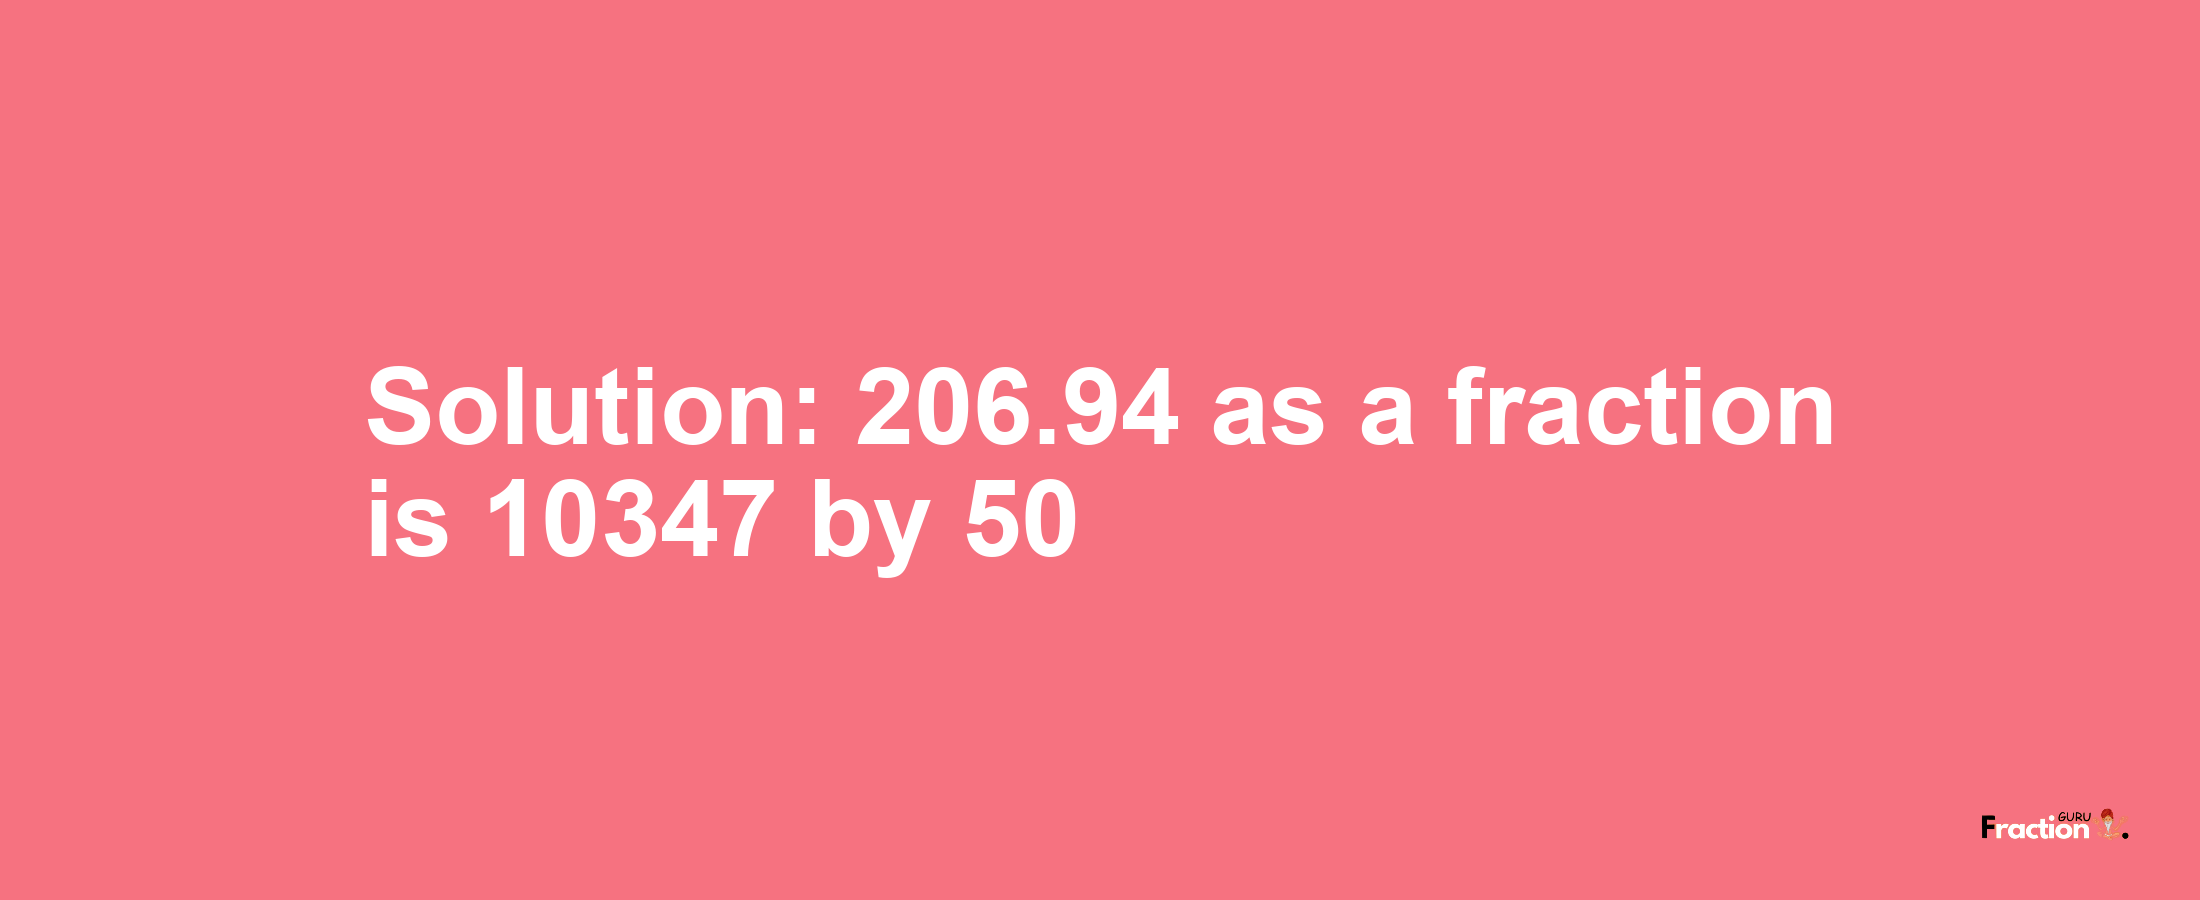 Solution:206.94 as a fraction is 10347/50